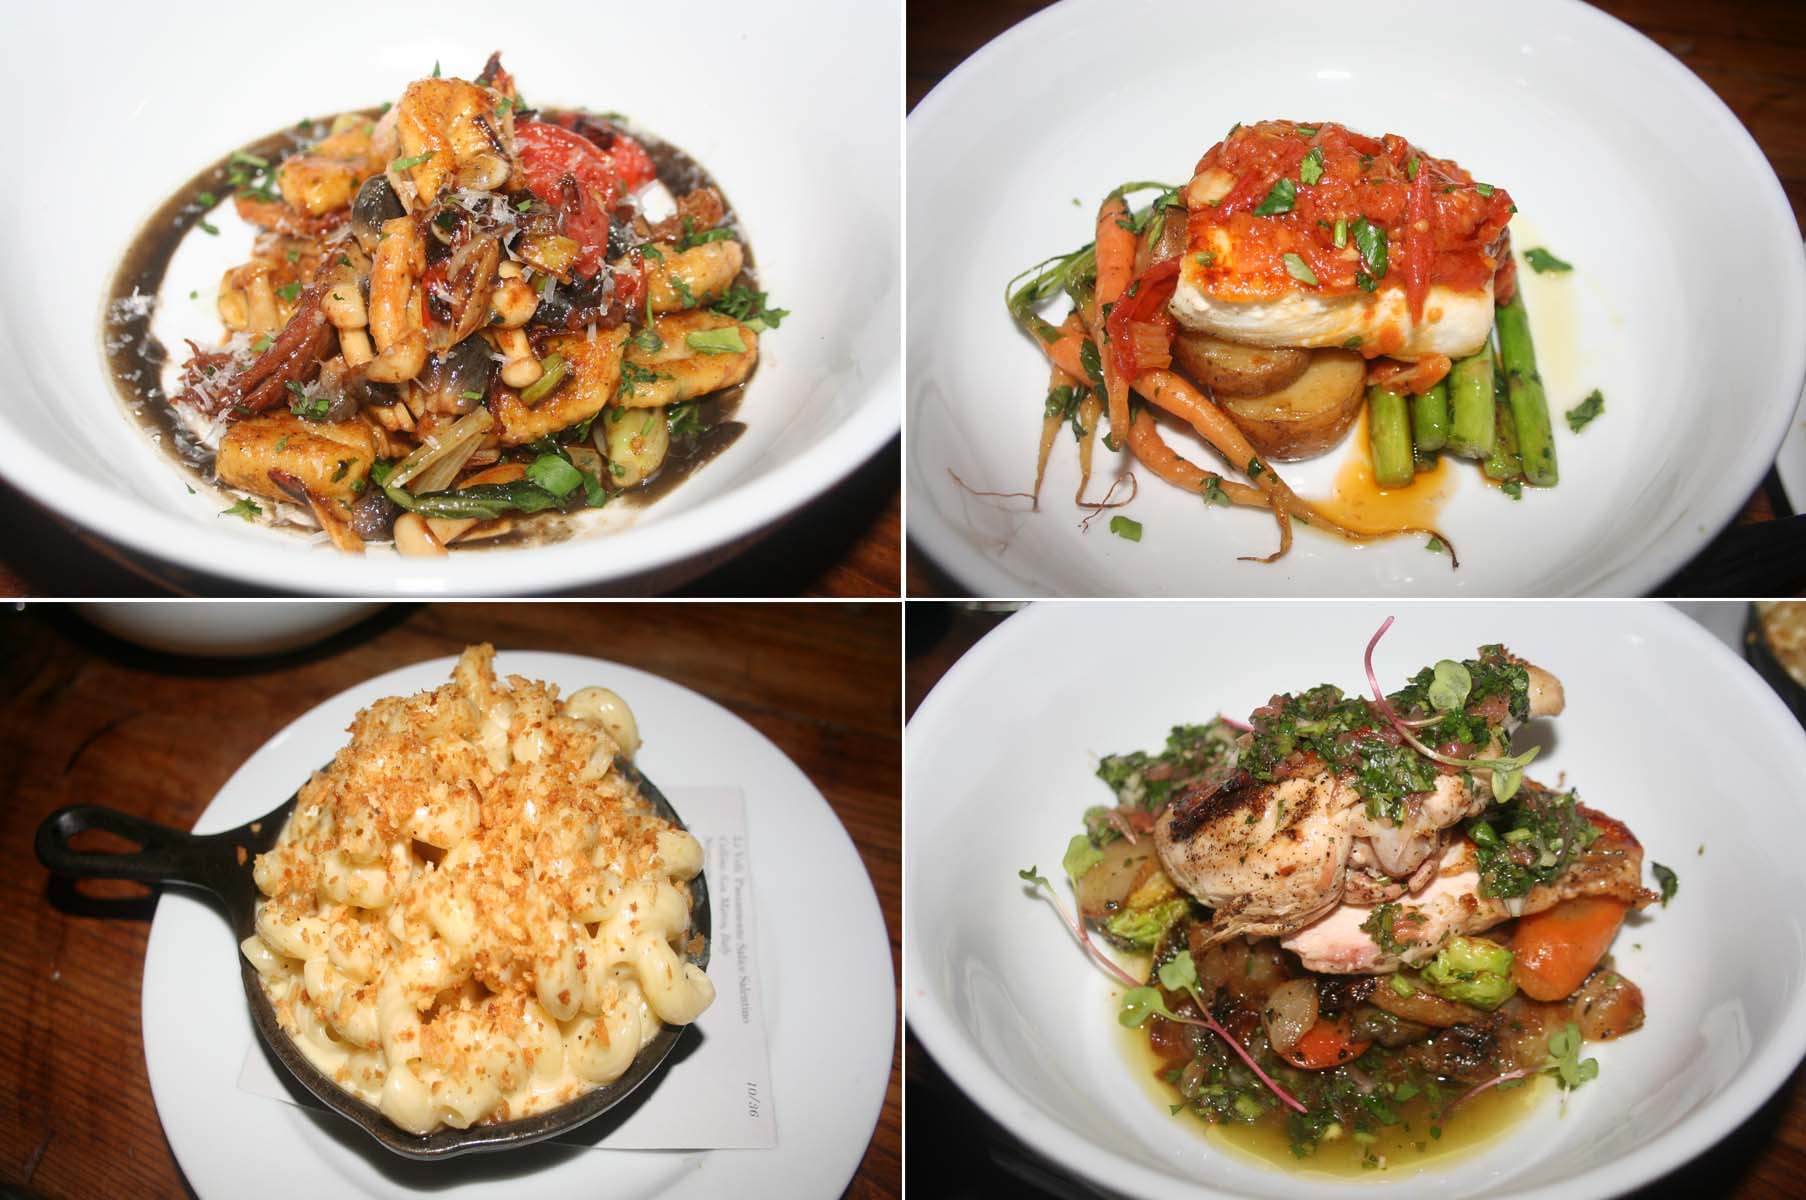 New entrees and sides at Big Bear Cafe include gnocci (clockwise from top left), pan roasted halibut, simple chicken and skillet macaroni and cheese. (Photos: Mark Heckathorn/DC on Heels)